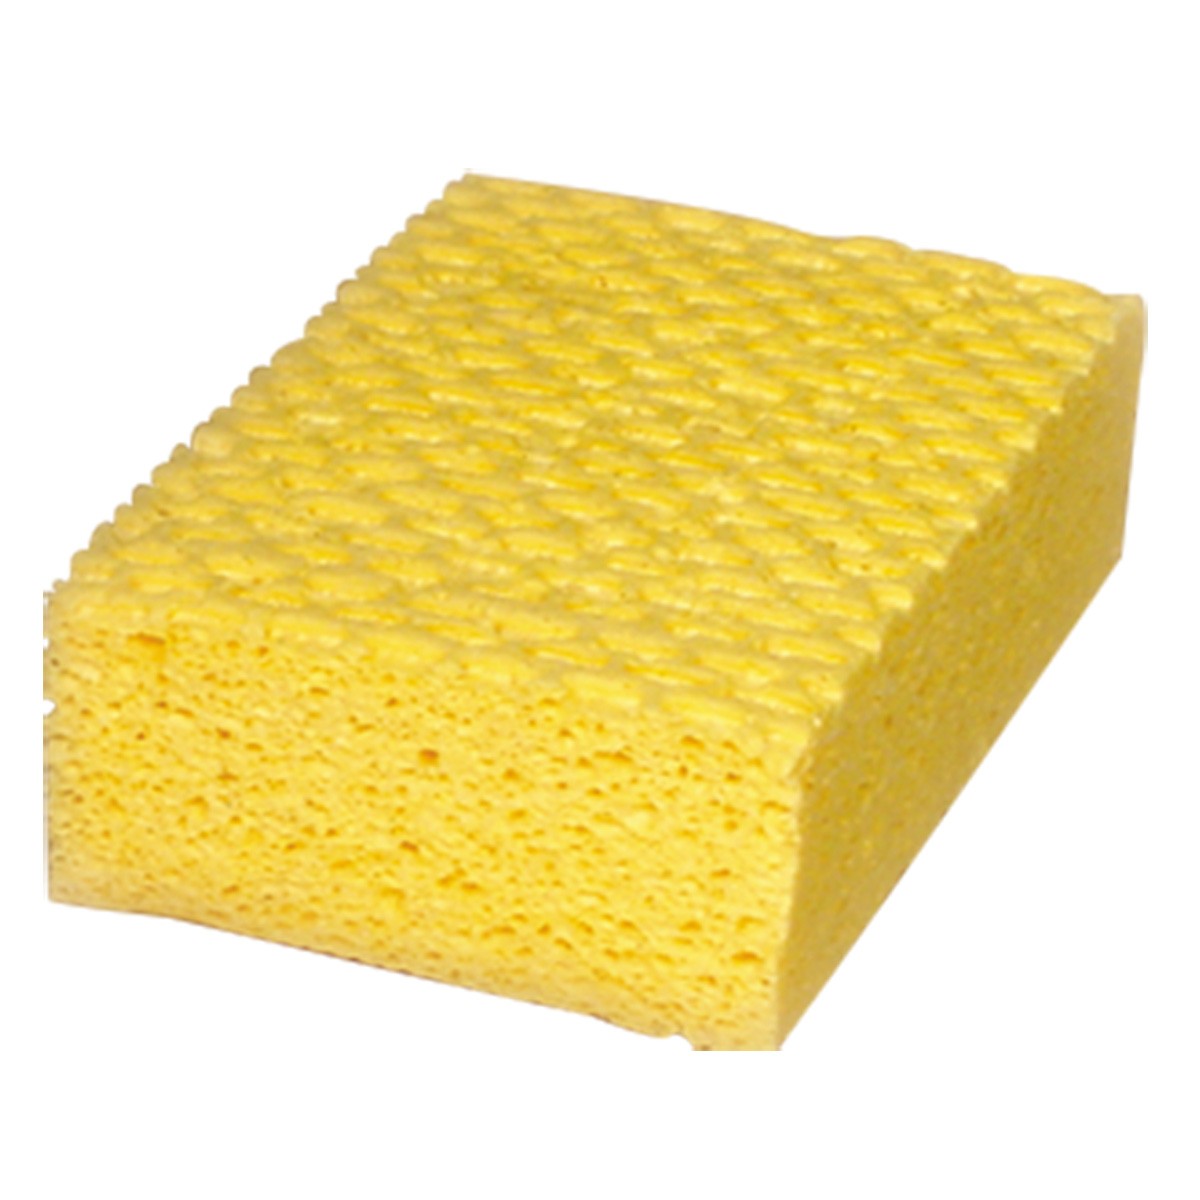 UltraSource Cellulose Block Sponges Pack of 24 Small 